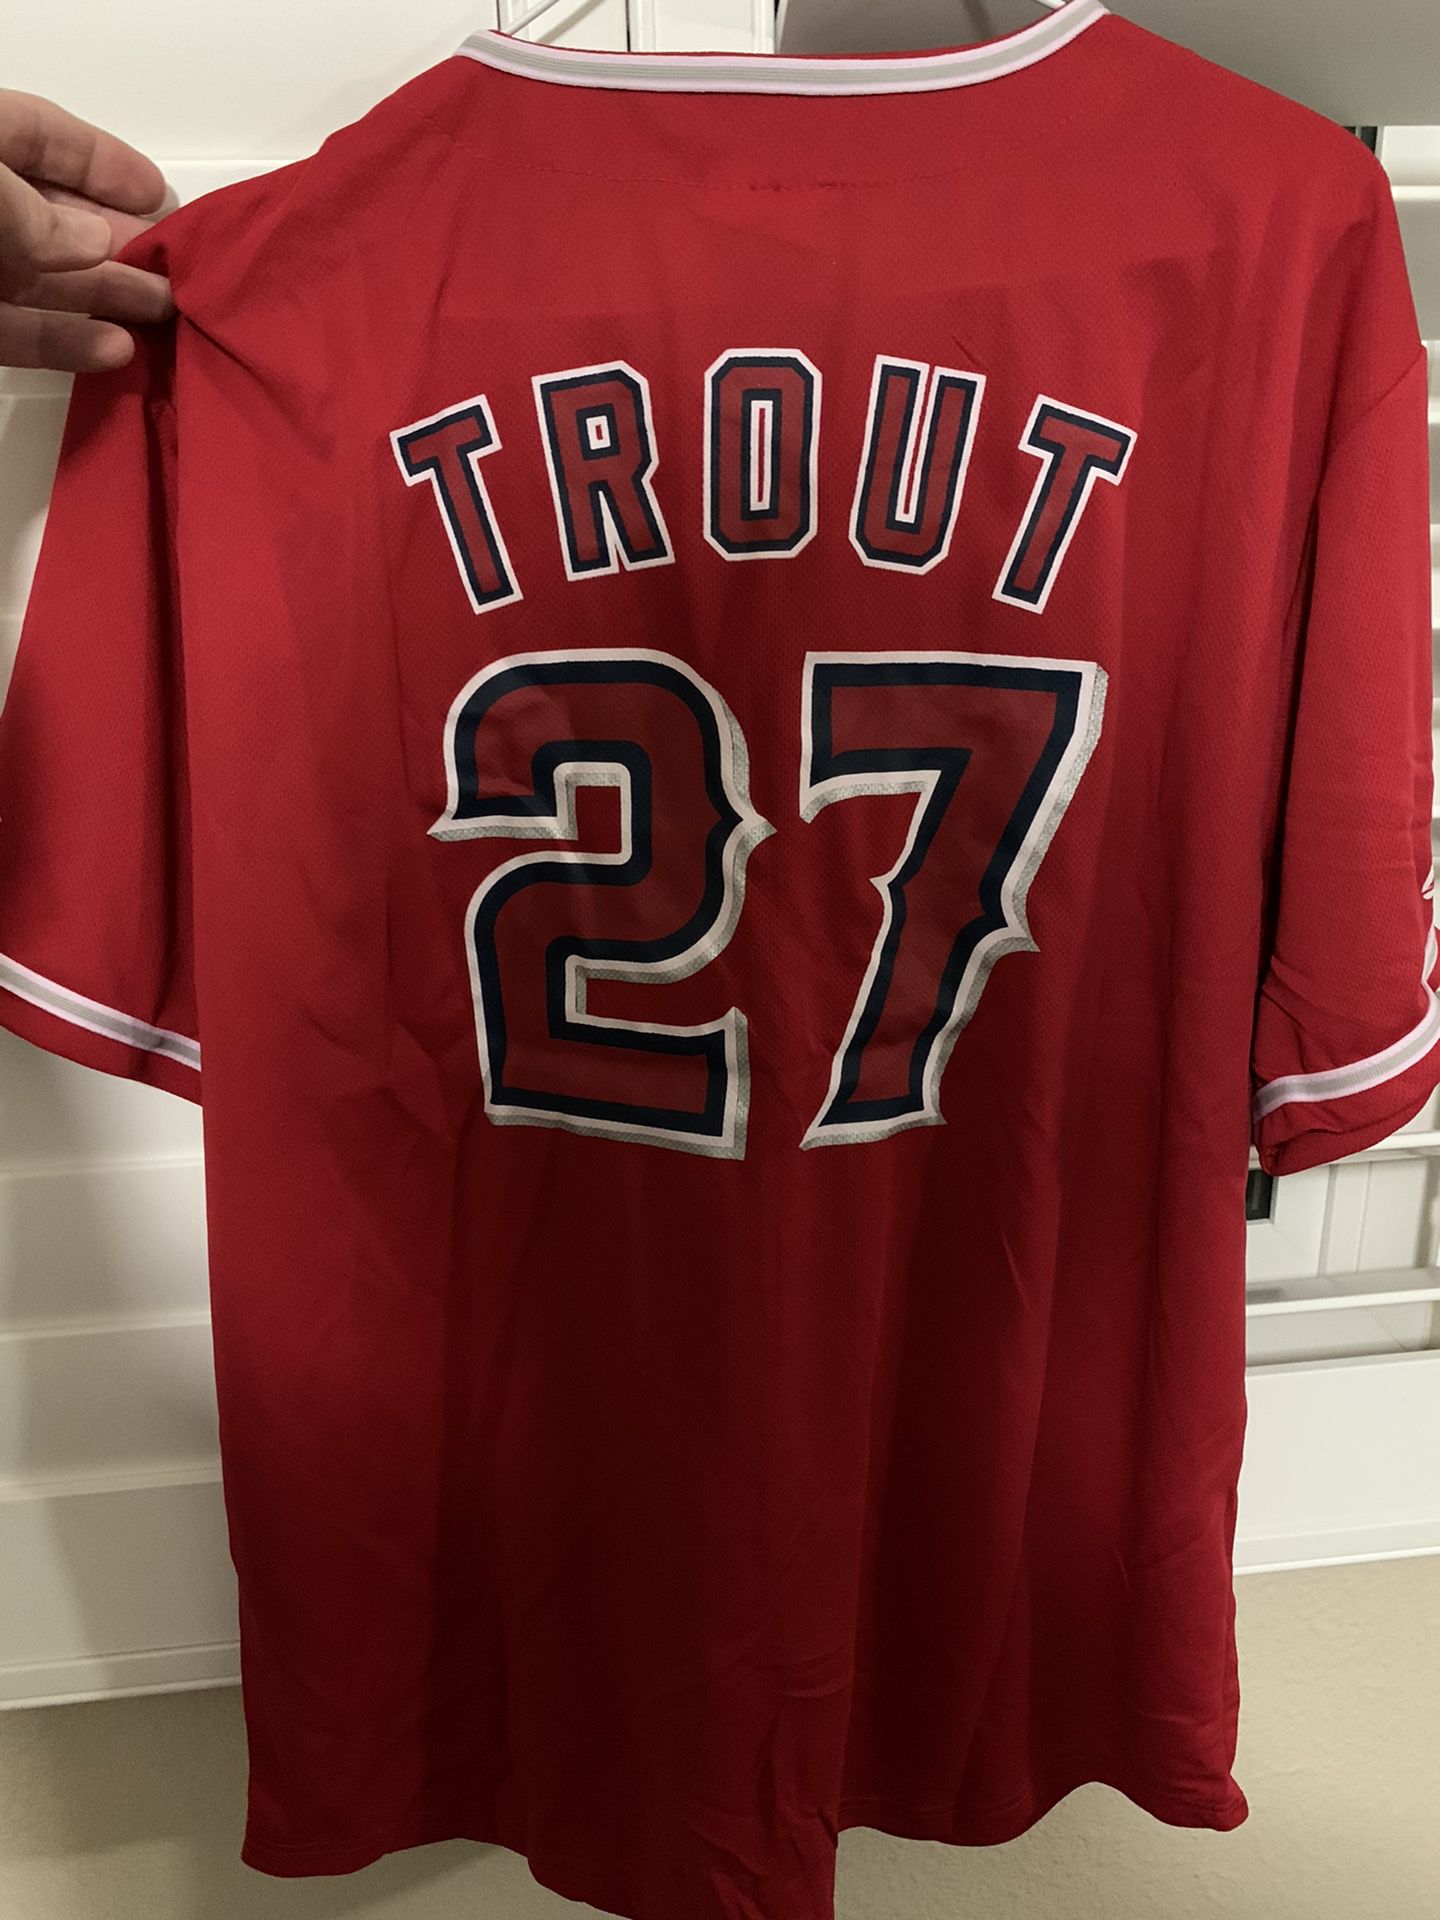 Mike Trout Jersey MVP/Silver Slugger/ROY - Angels Jersey Size X-Large (Adult XL) NEW - $10 ea.